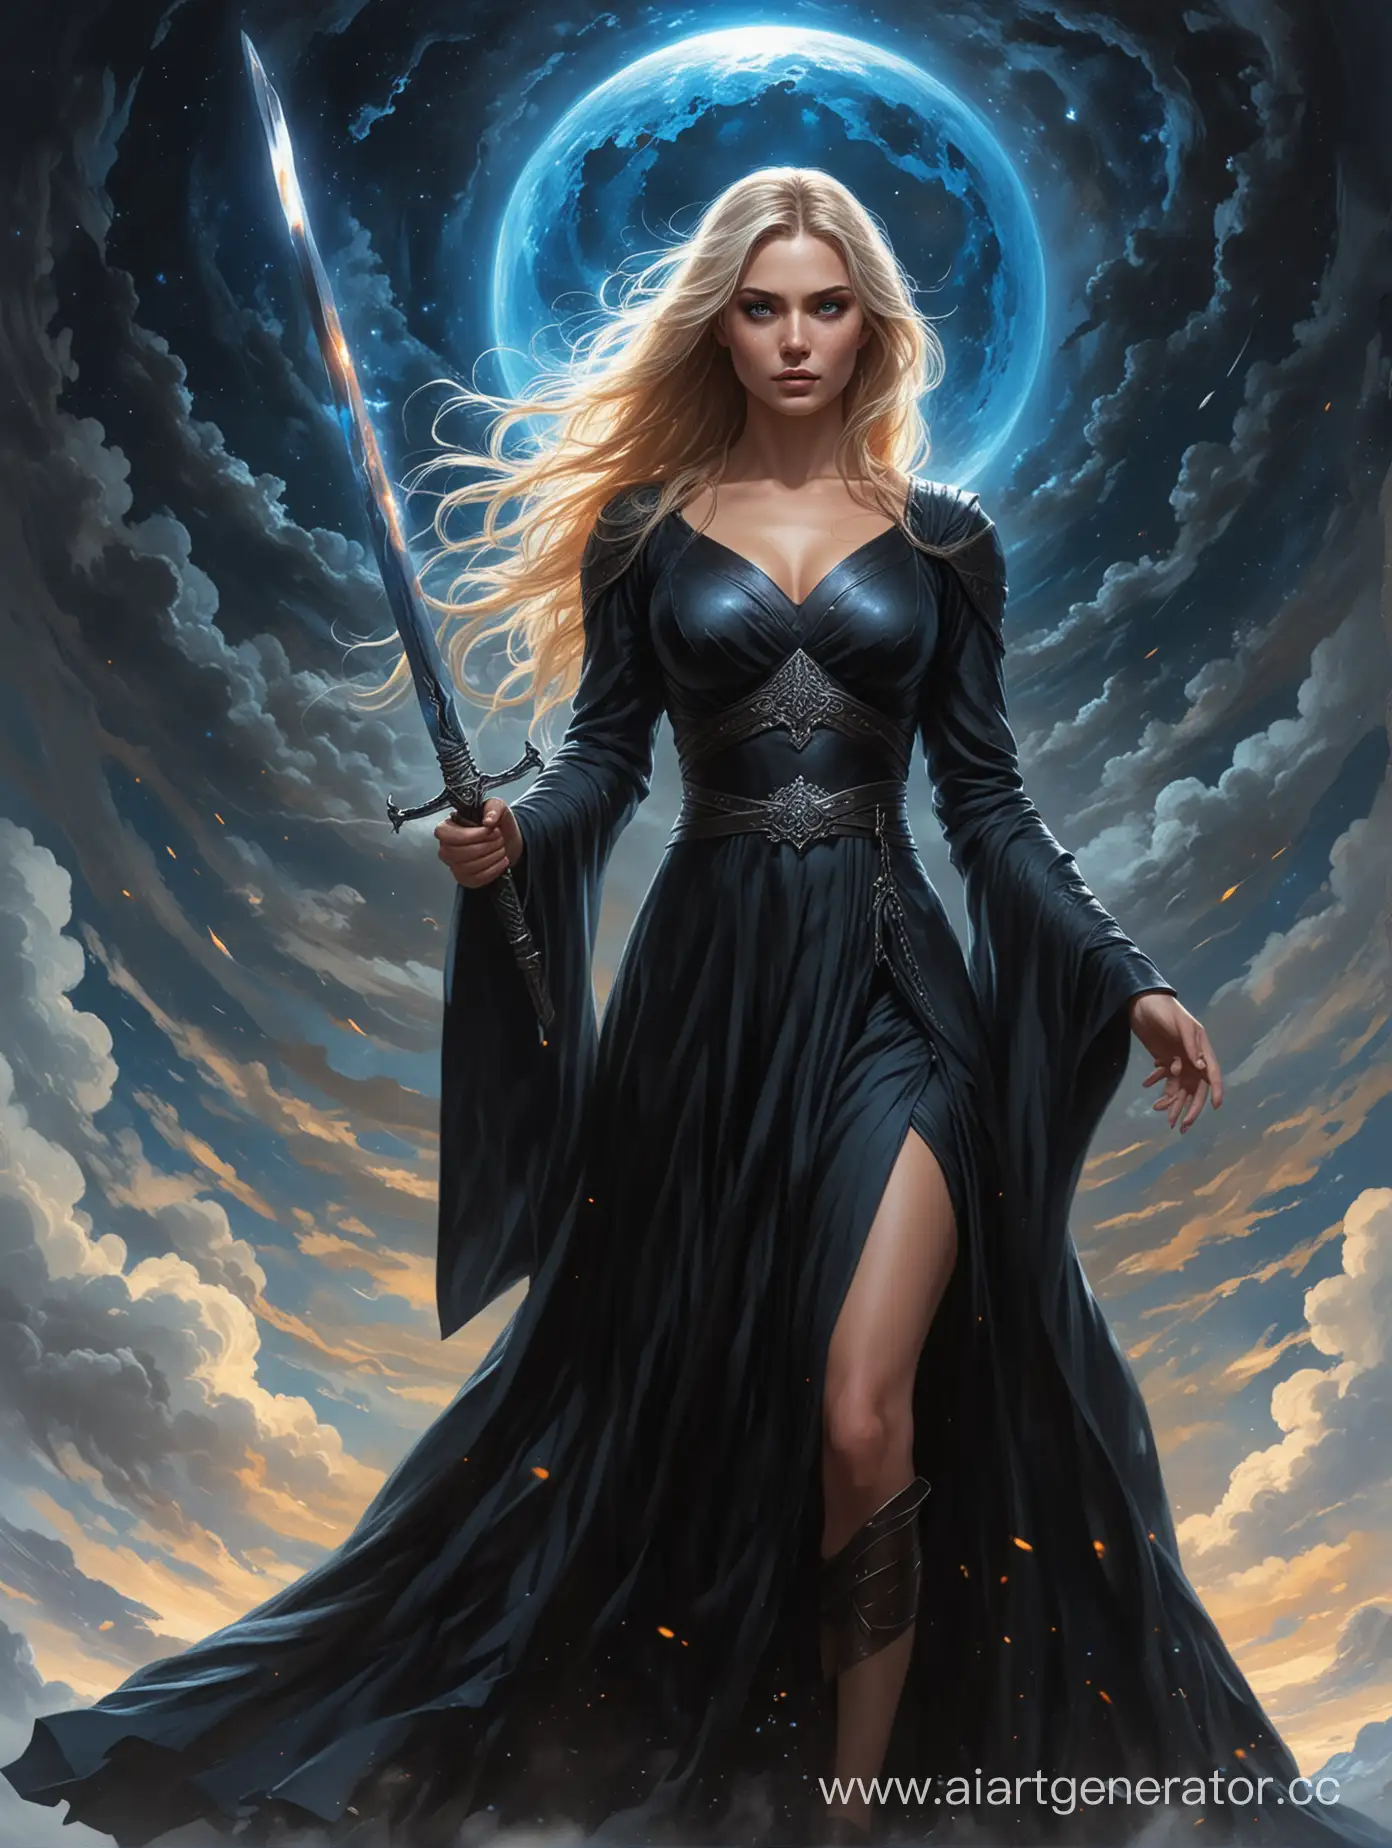 Priestess-Warrior-in-Billowing-Black-Dress-with-Glowing-Eyes-and-Sword-Against-Cosmic-Background